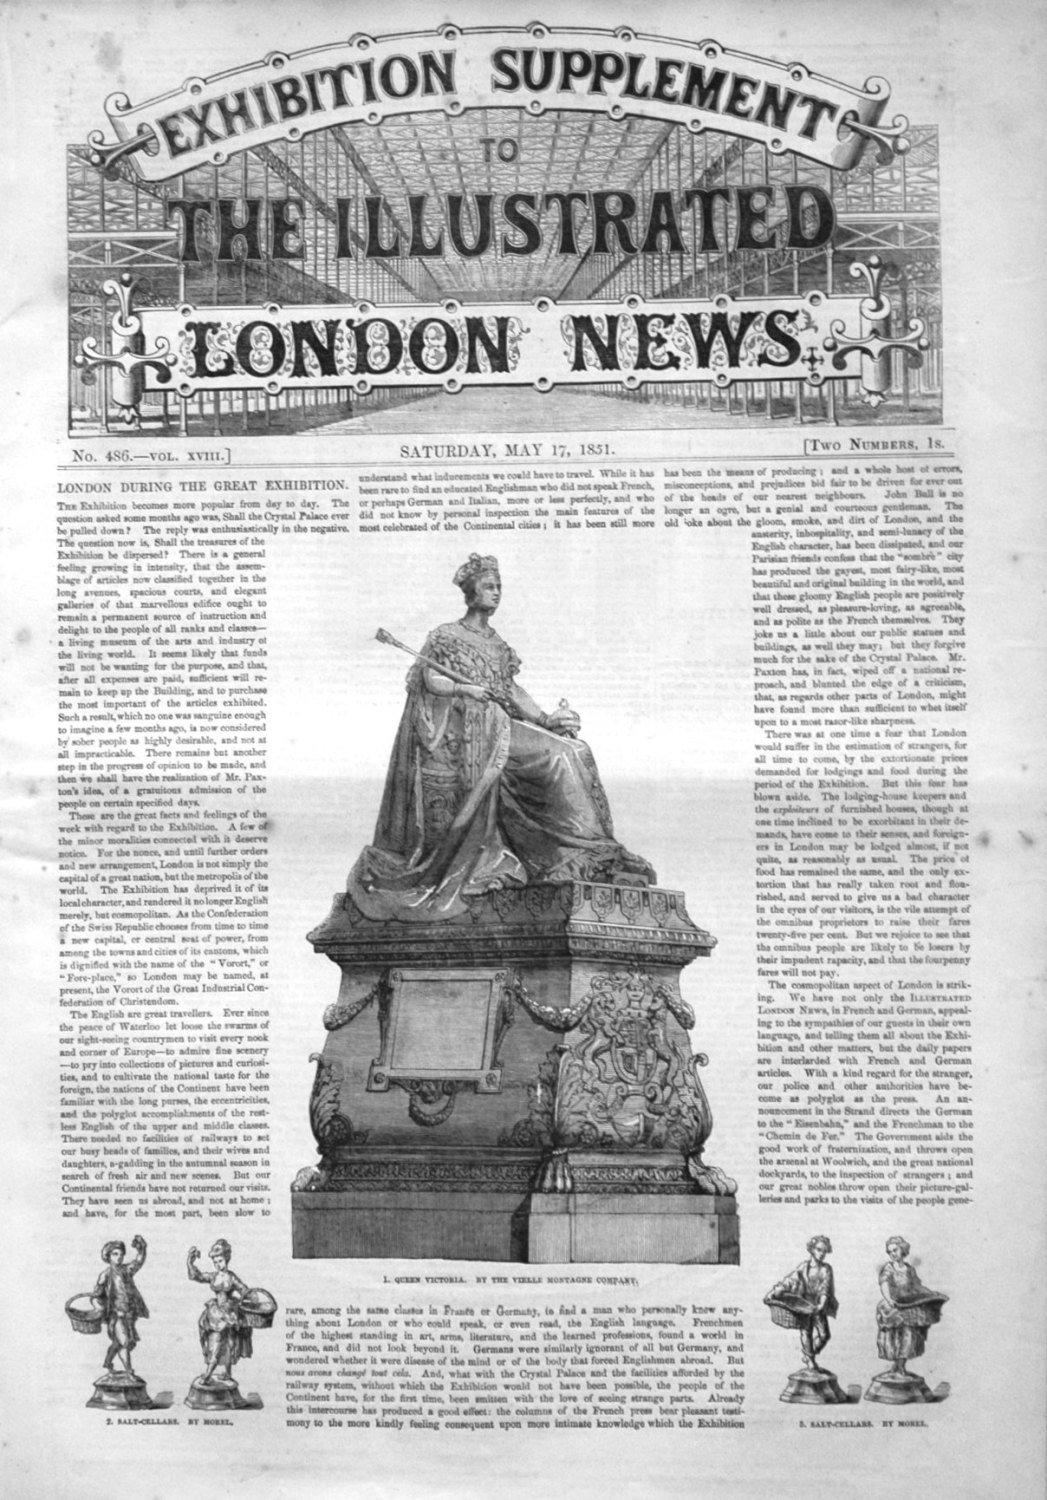 Exhibition Supplement to the Illustrated London News May 17th 1851.